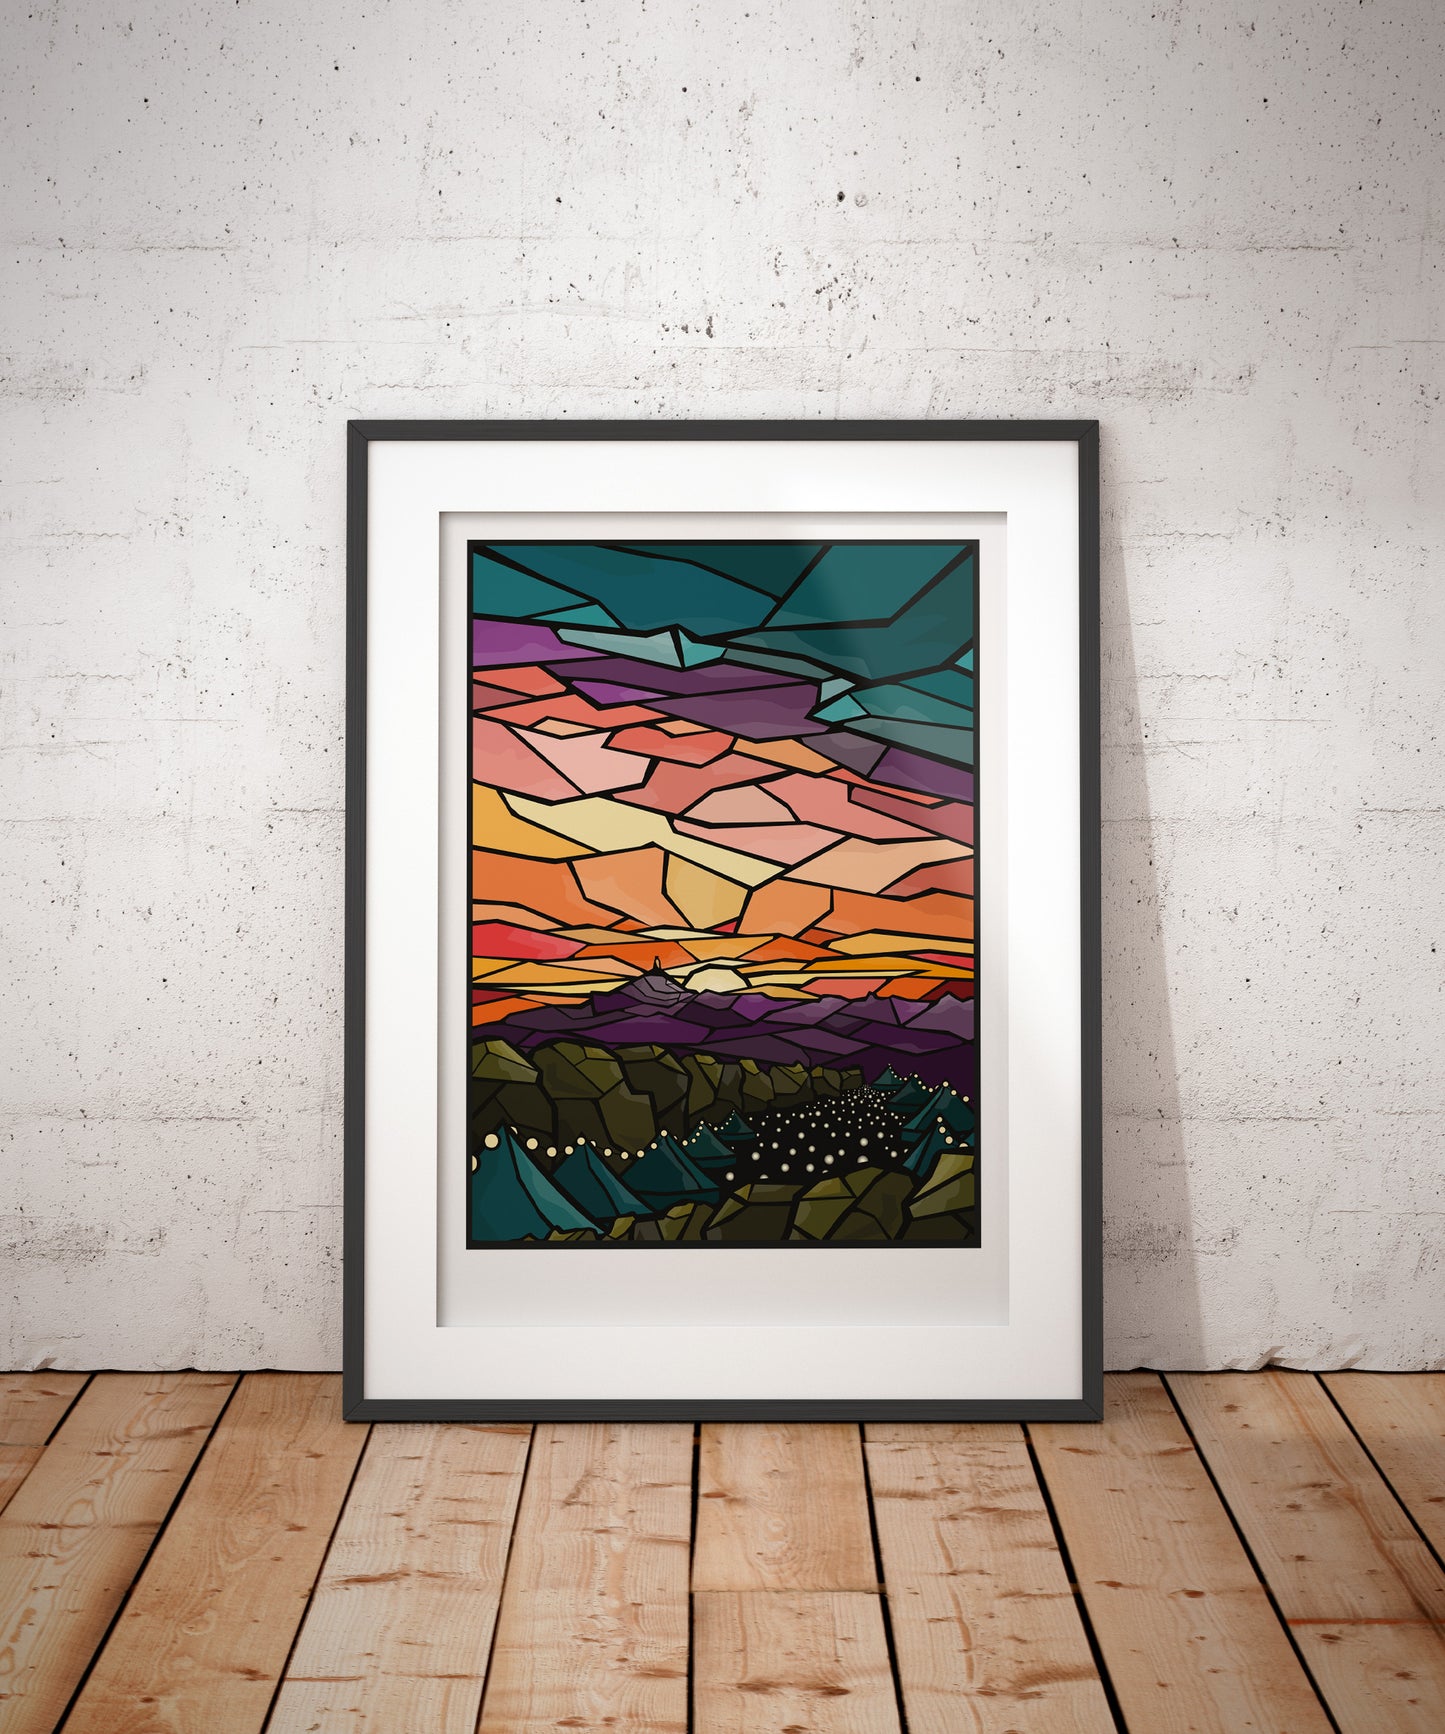 Glastonbury Festival - Stained Glass Poster Print